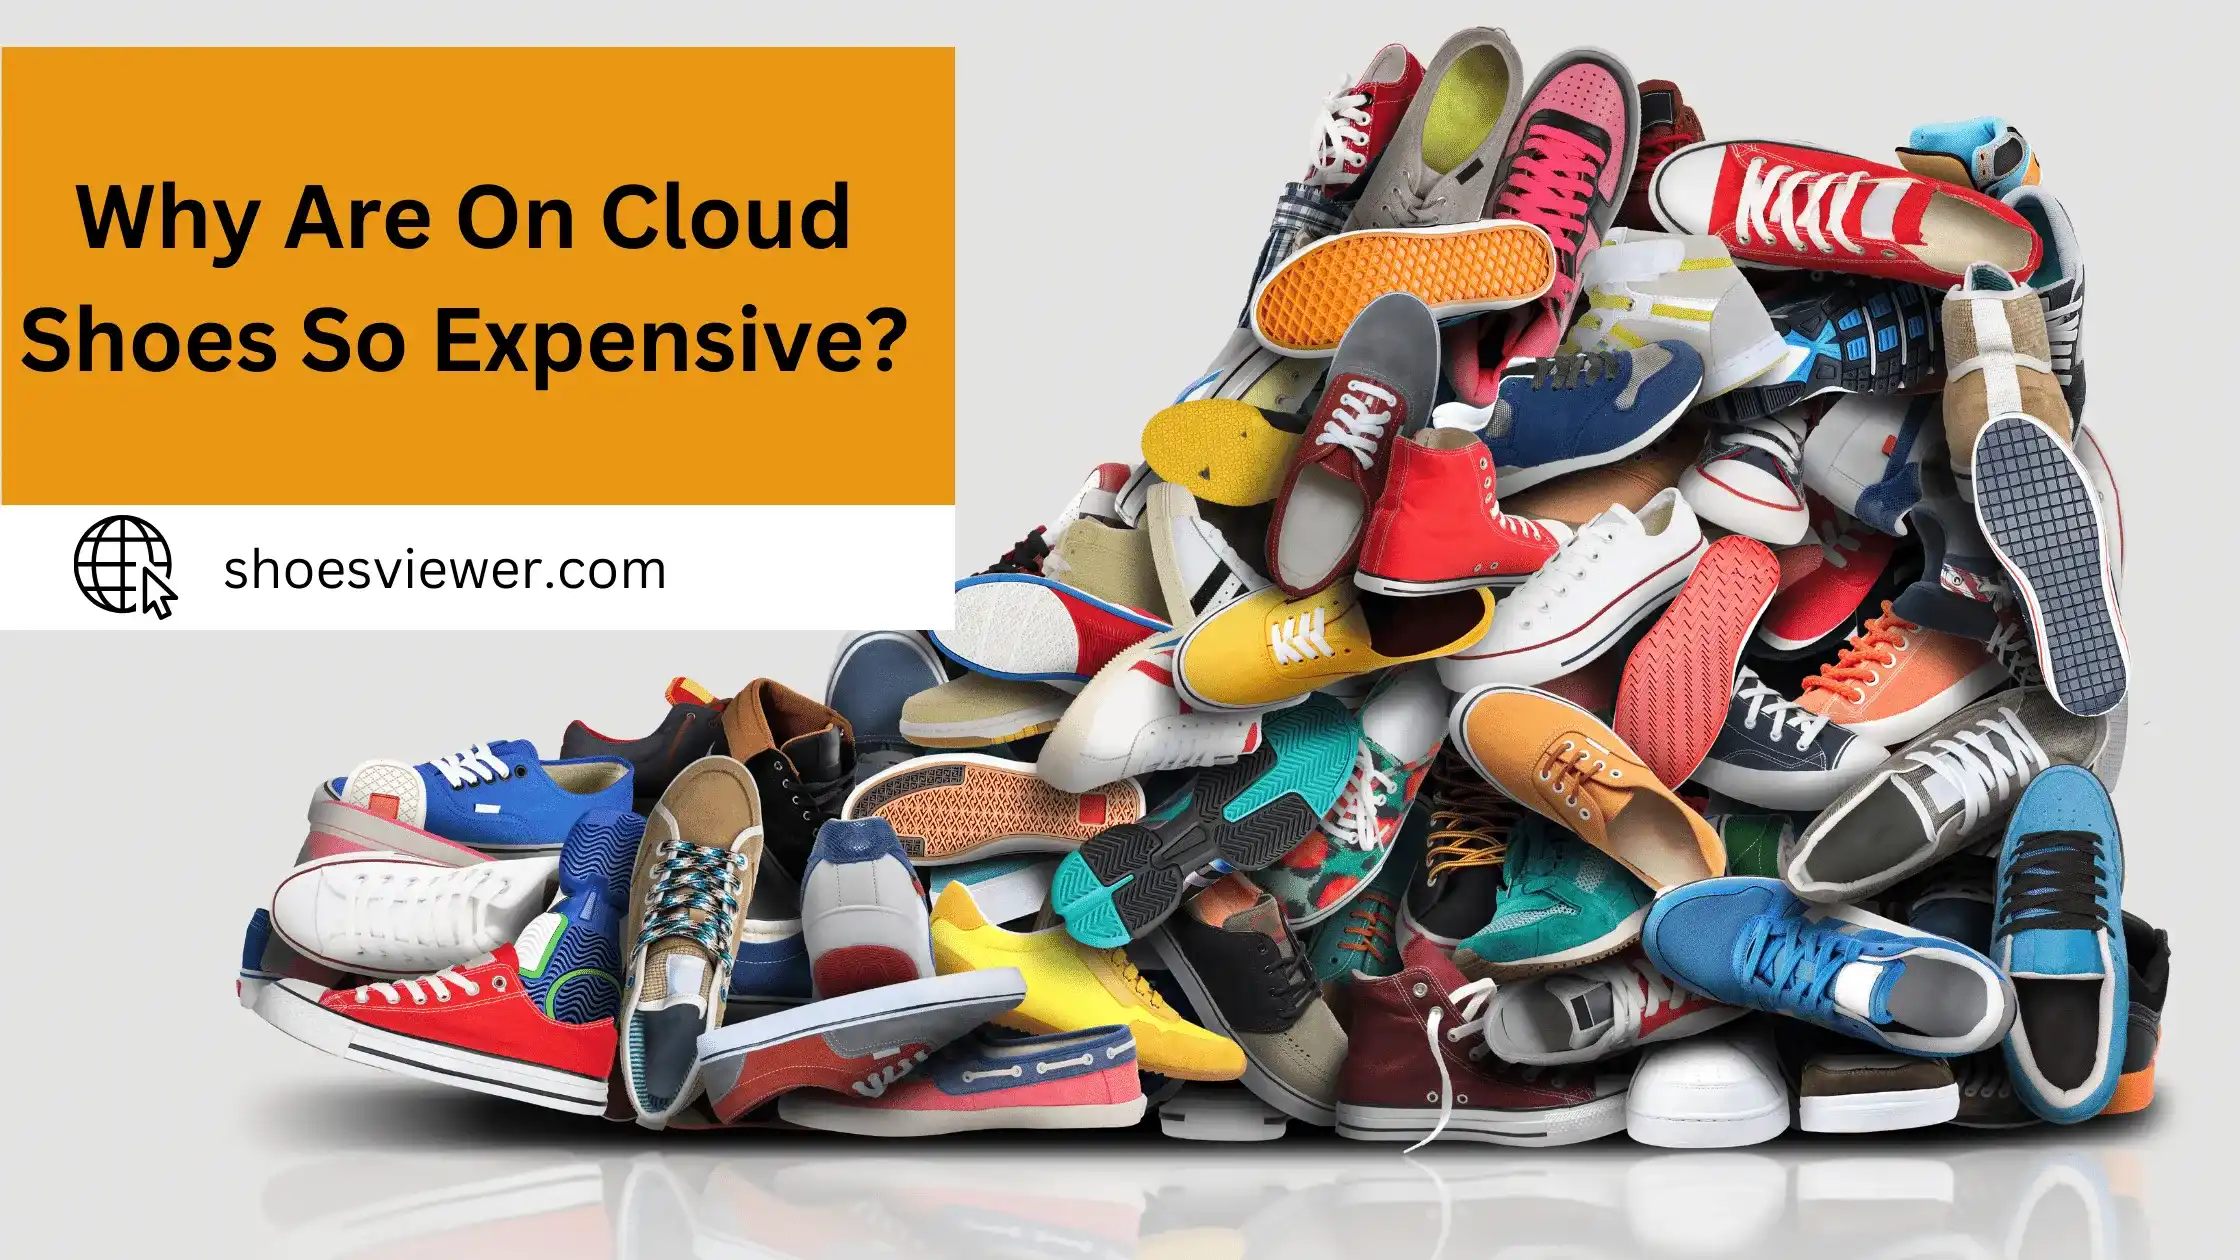 Why Are On Cloud Shoes So Expensive? (An In-Depth Guide)